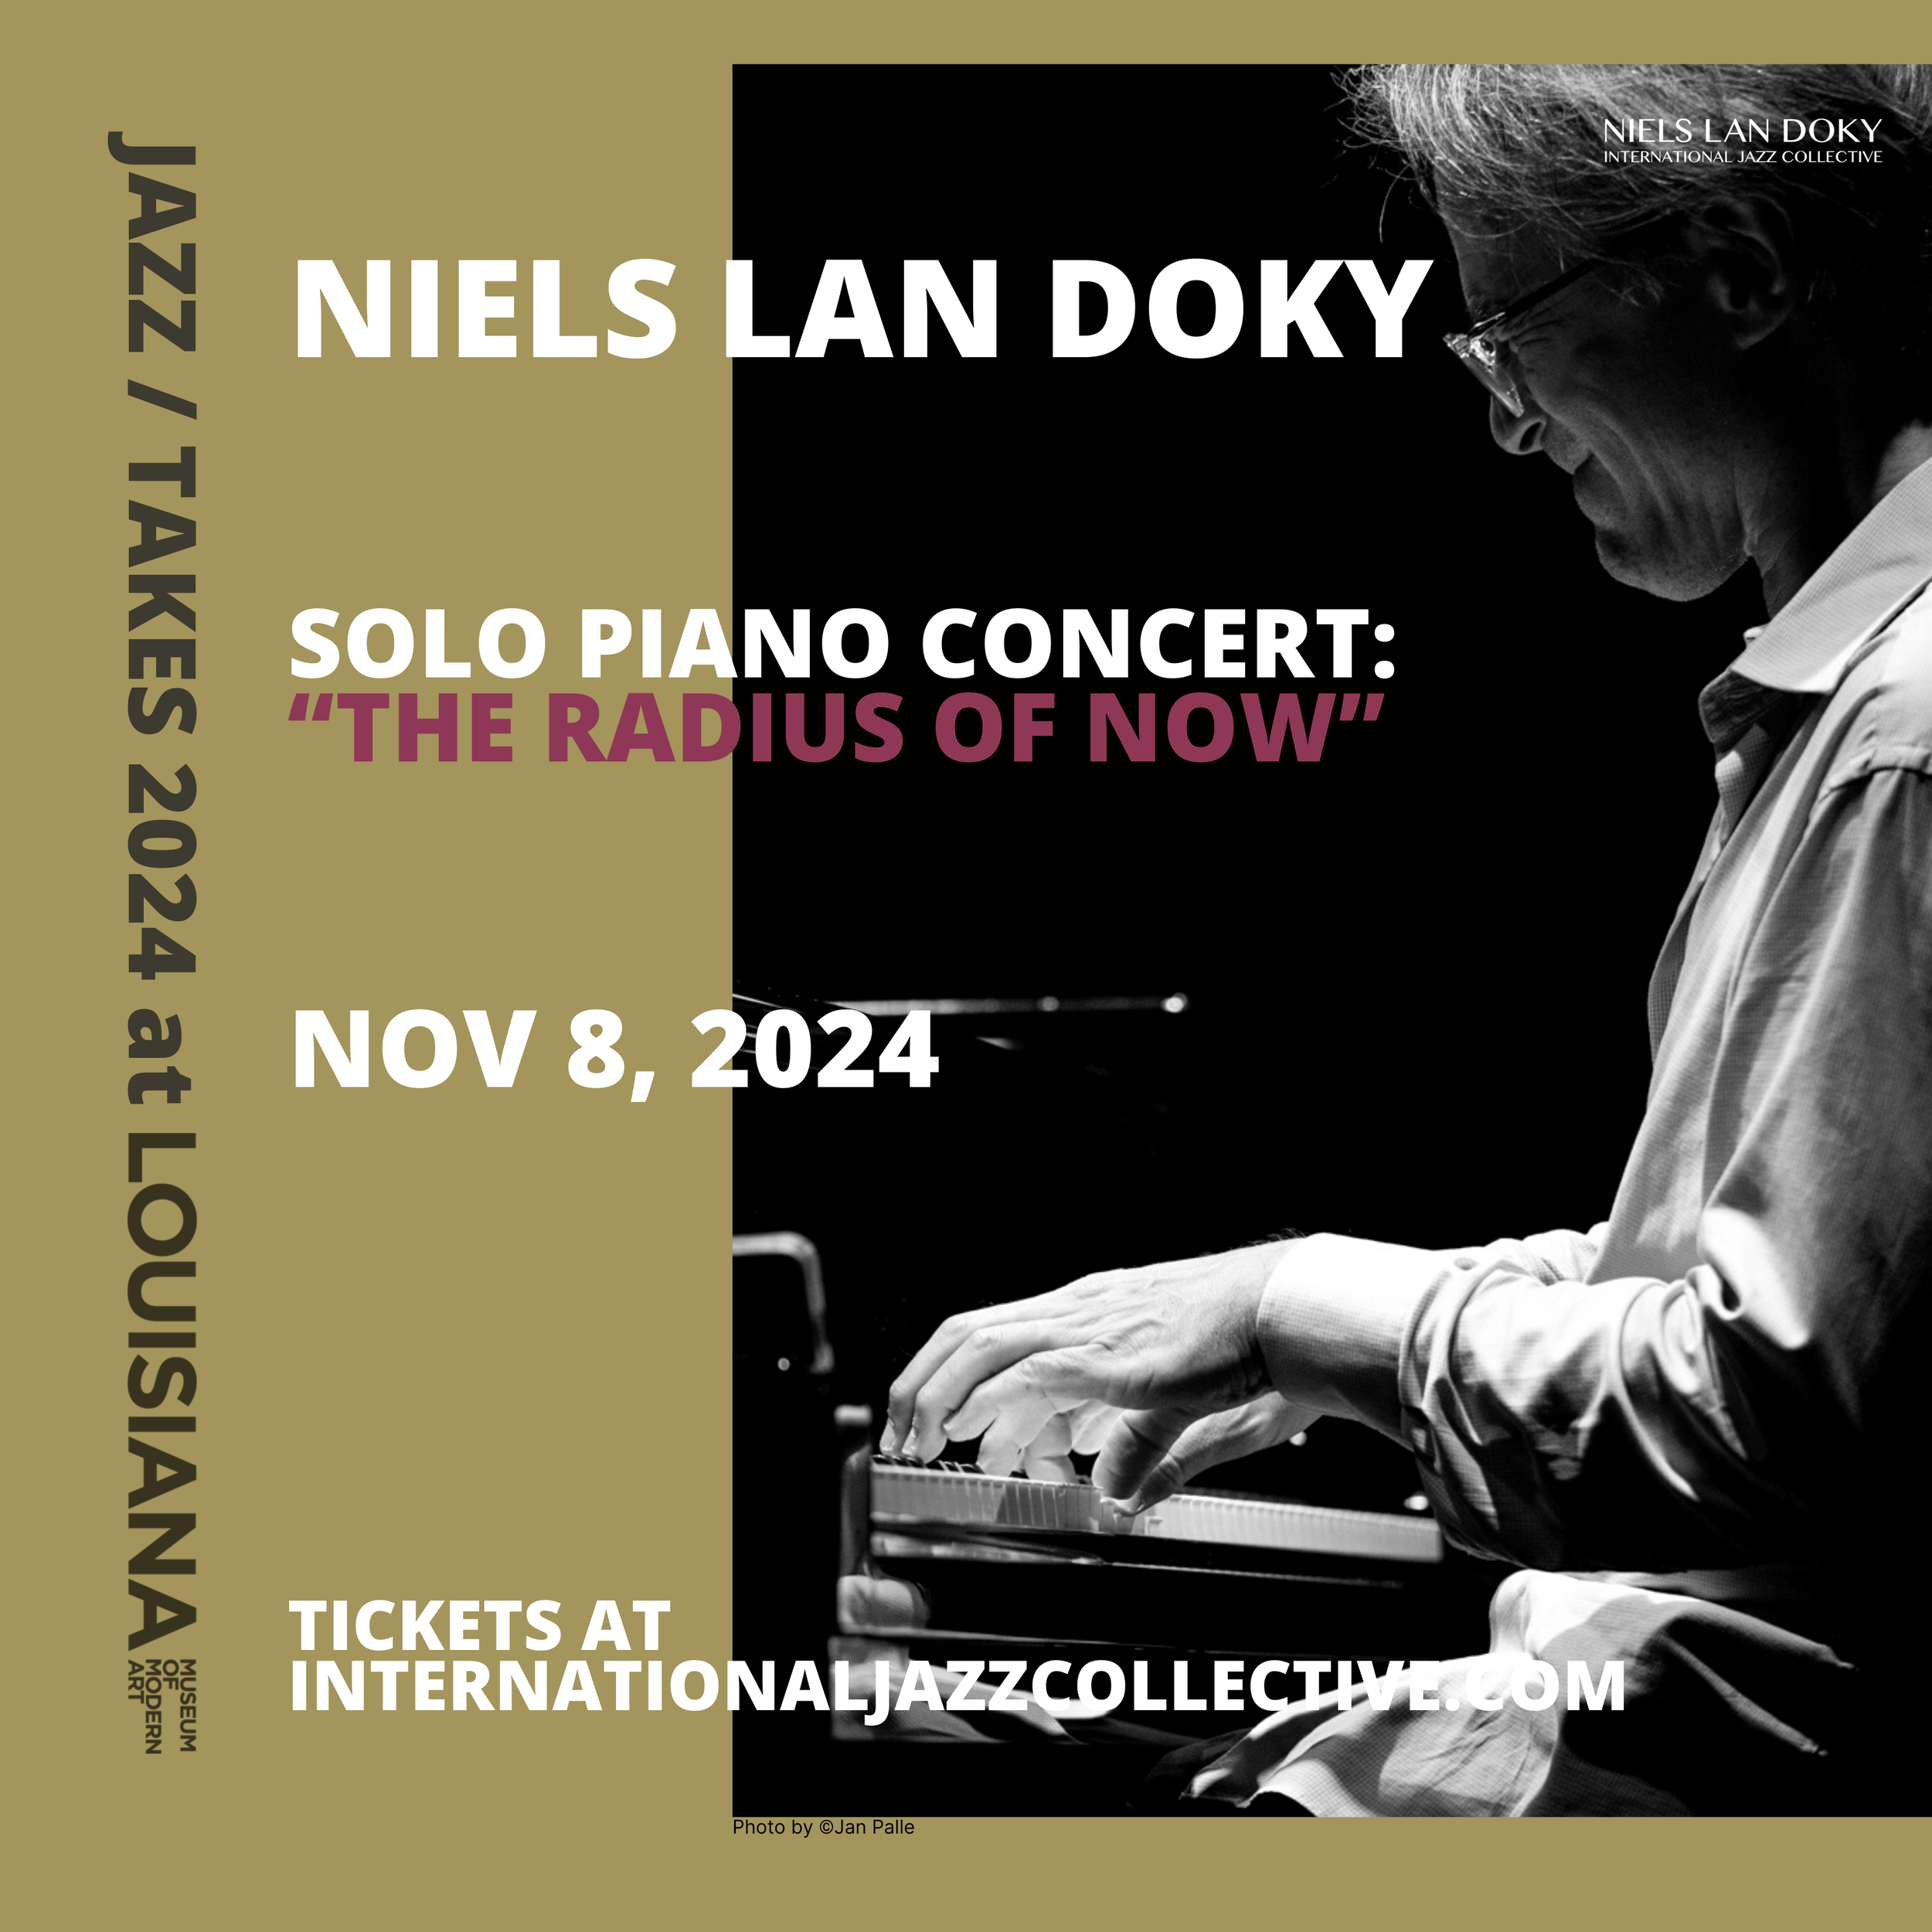 NLD Solo Piano Concert.png